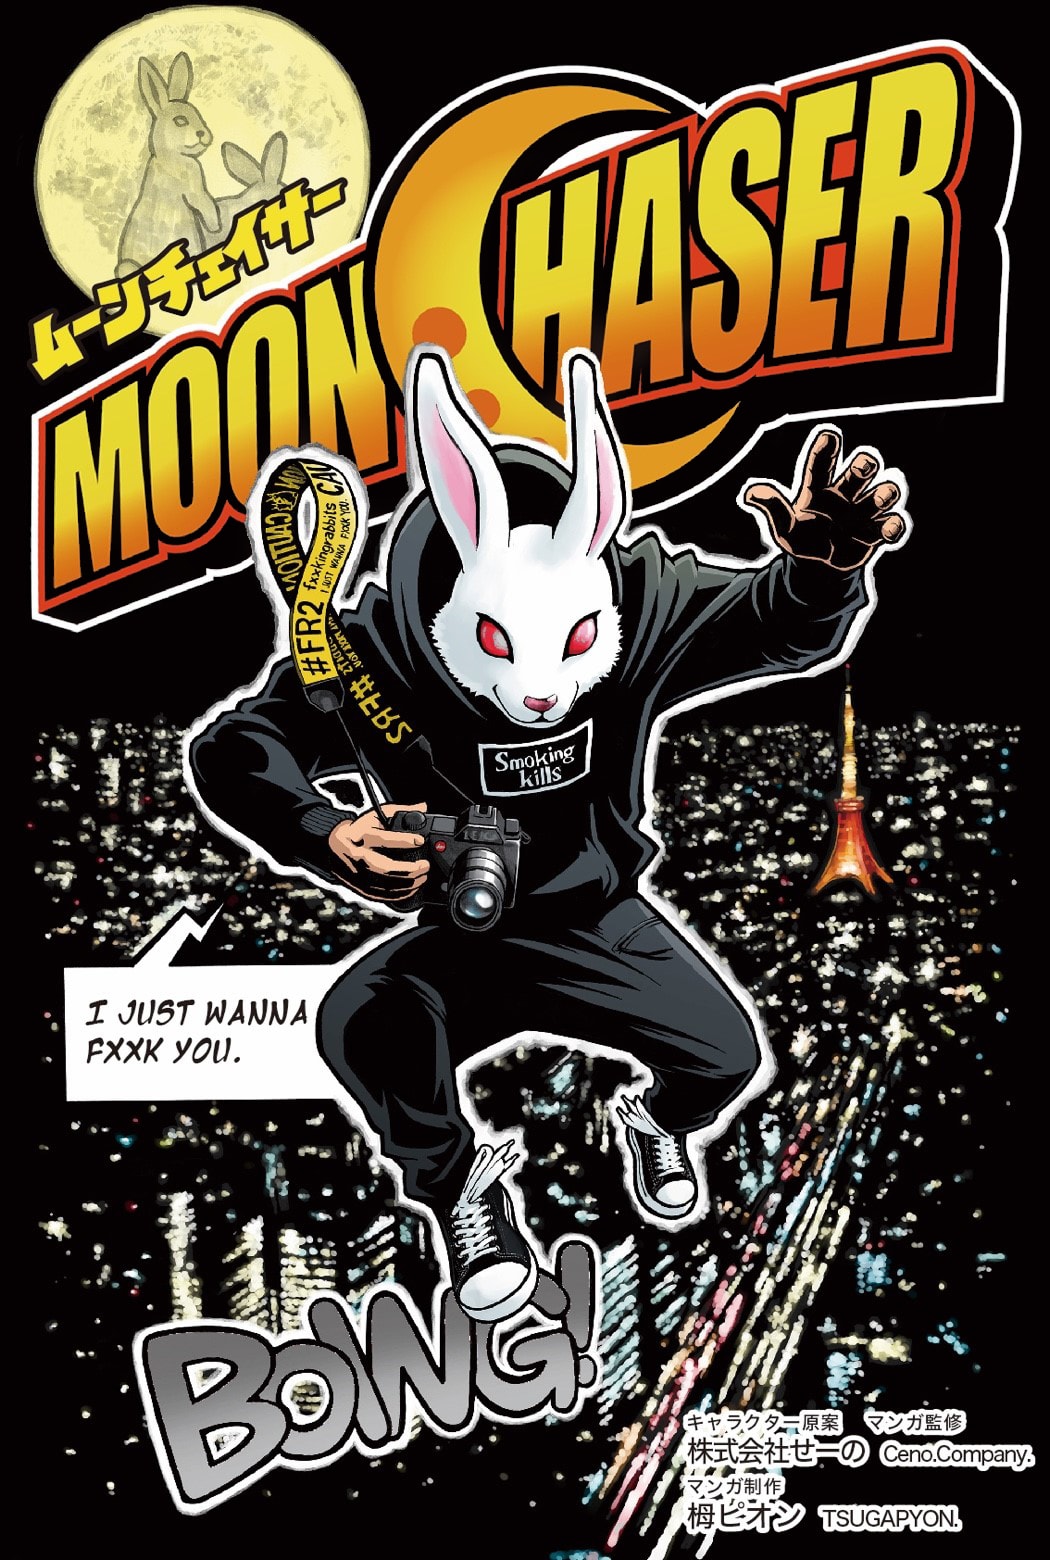 Fxxking Rabbits 創意擴散推出網絡漫畫《MOON CHASER》